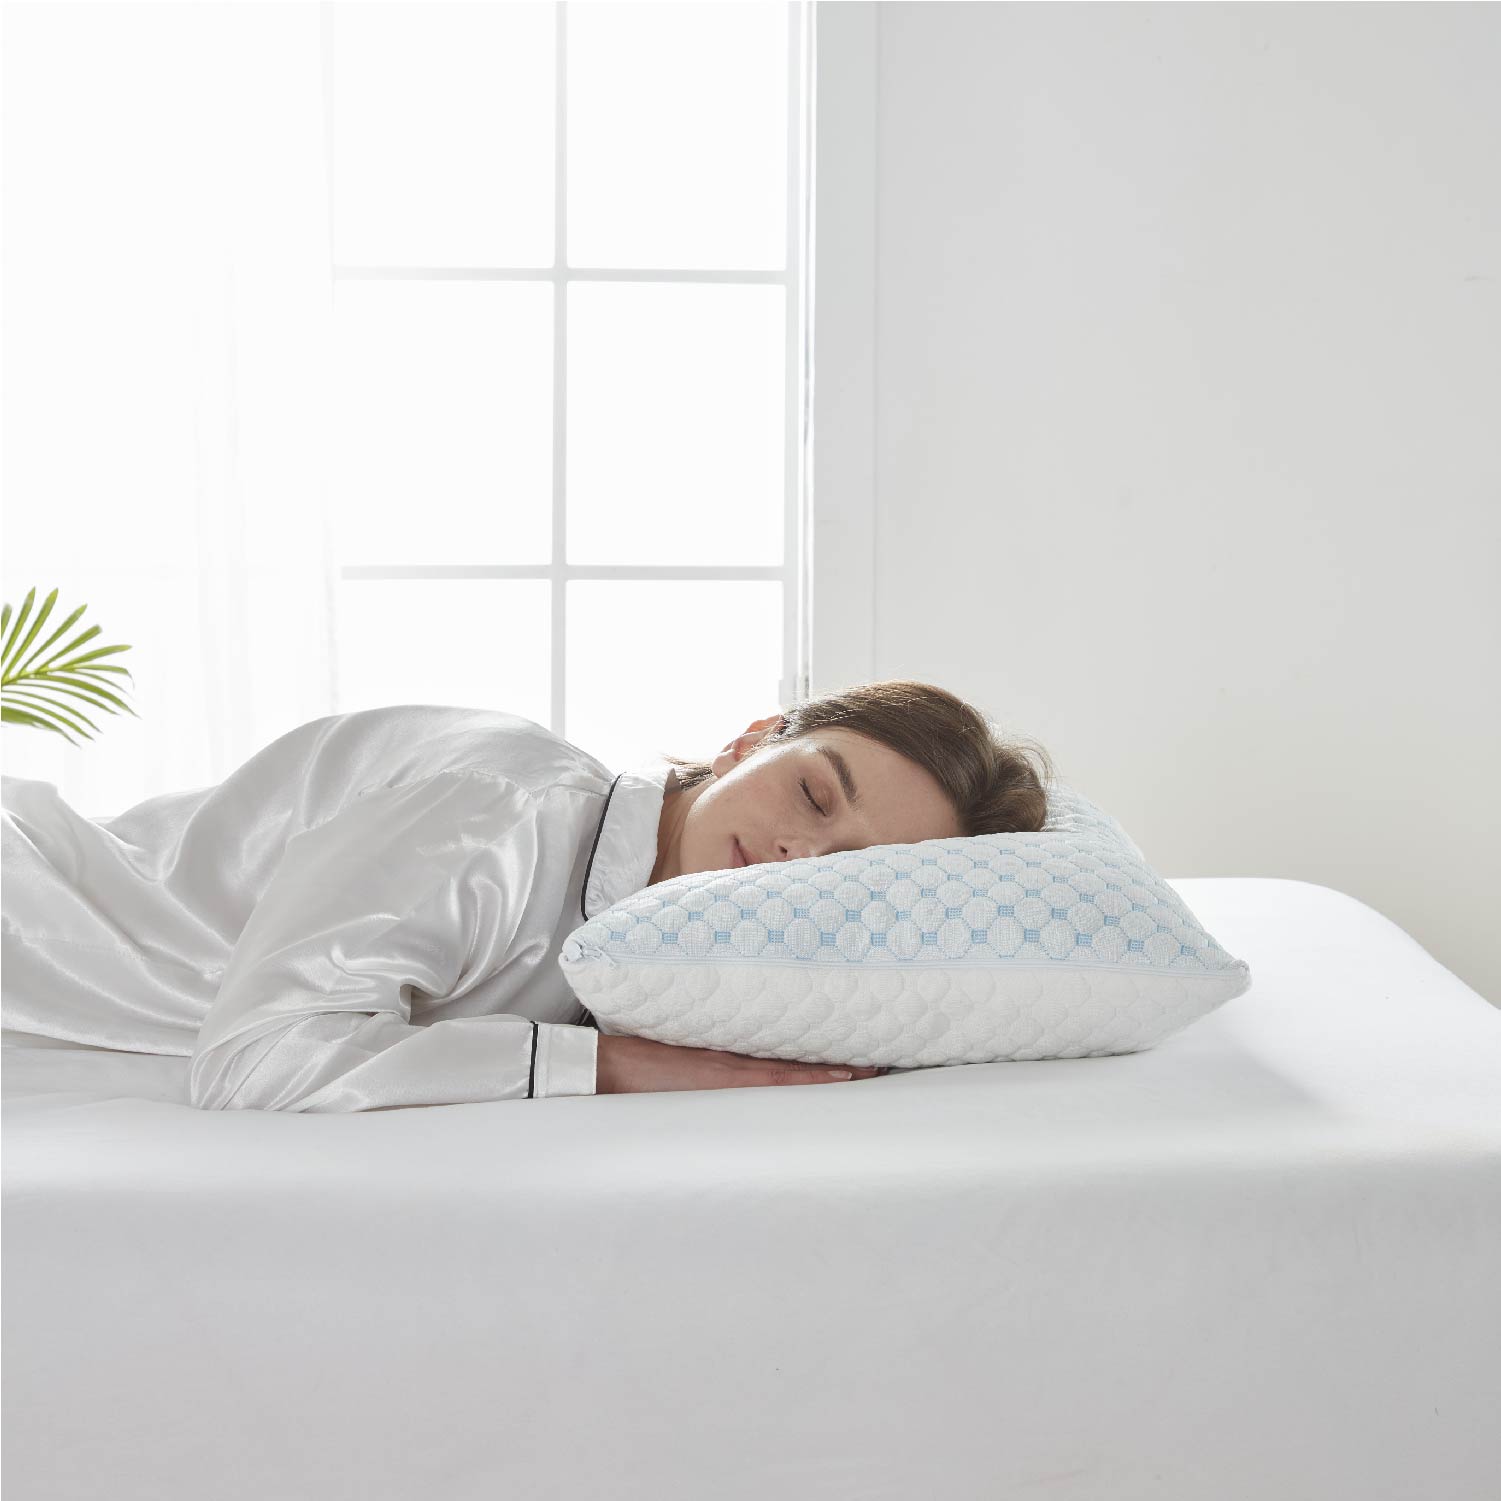 Clara clarks cooling pillow is ultimate comfort when falling asleep and works perfectly for hot sleepers